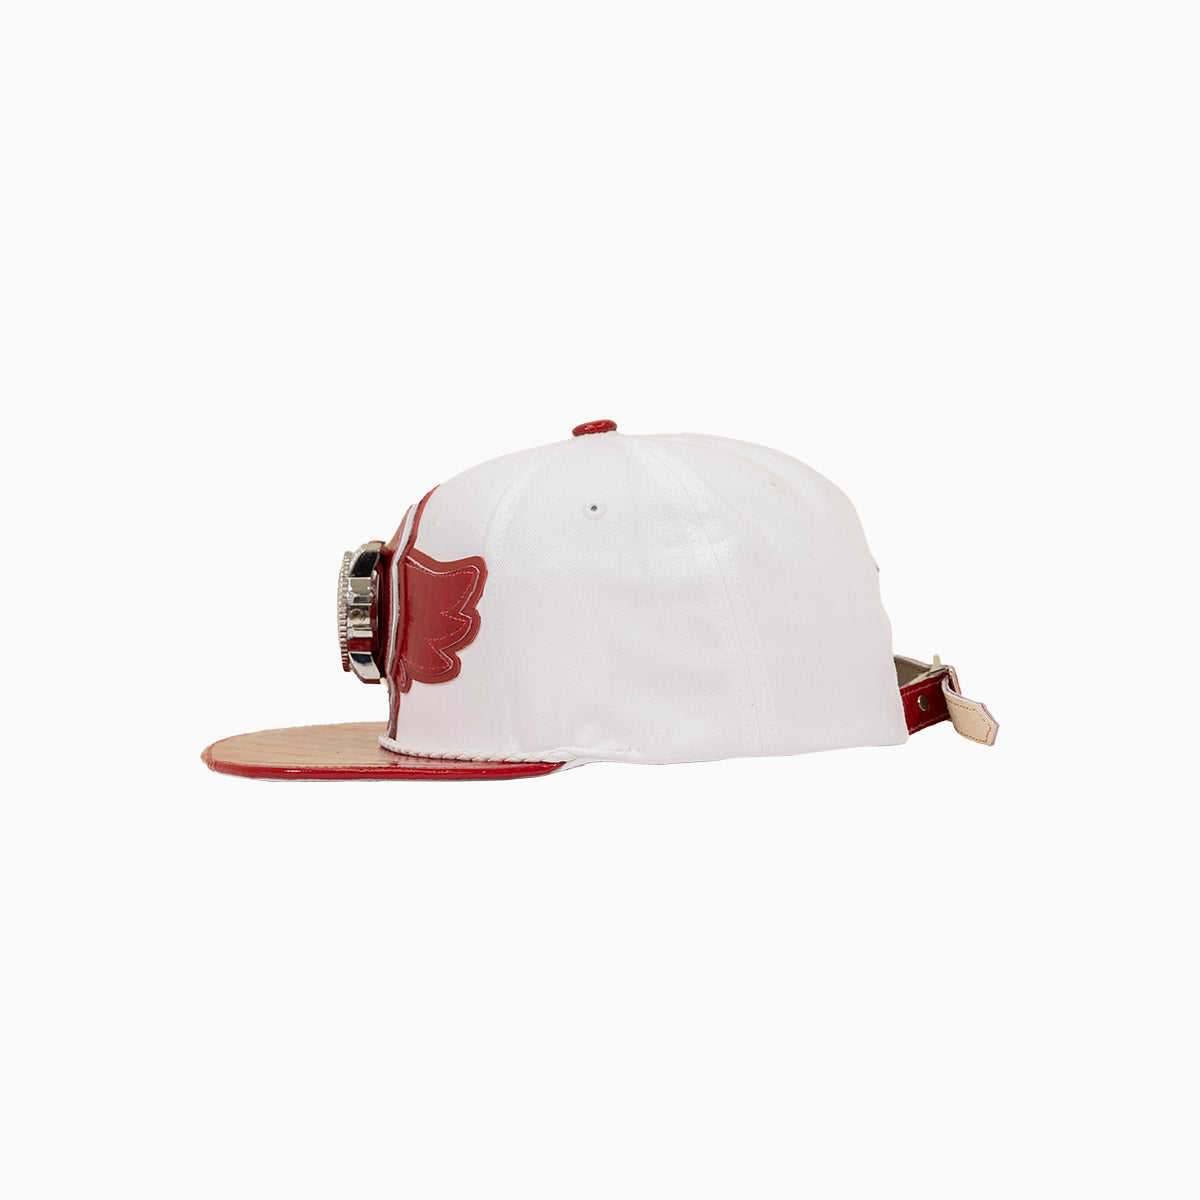 breyers-buck-50-wool-hat-with-leather-visor-breyers-lwh-white-red